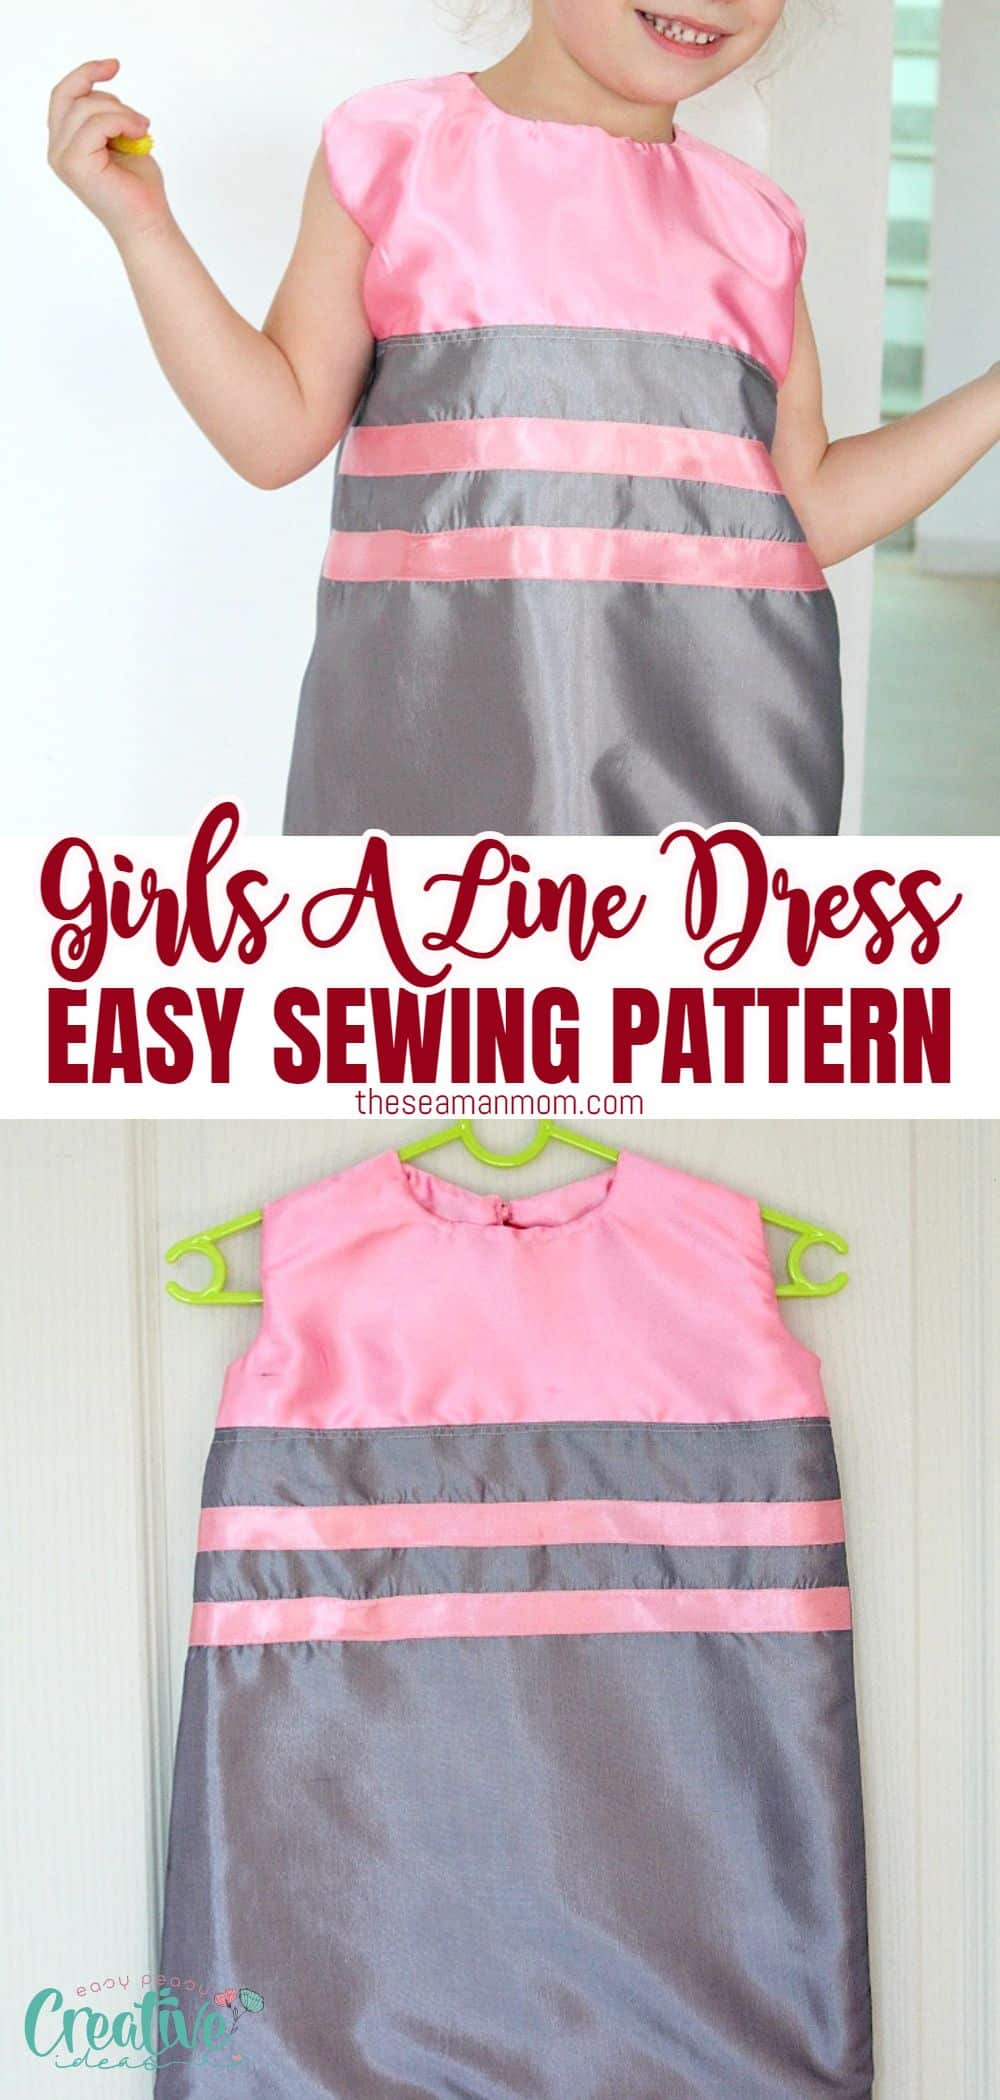 Do you need an easy-to-follow pattern for a stylish and cozy dress for kids? This sleeveless A line dress pattern with two-tone colors and ribbon accents is a perfect sewing project for your little girl! via @petroneagu